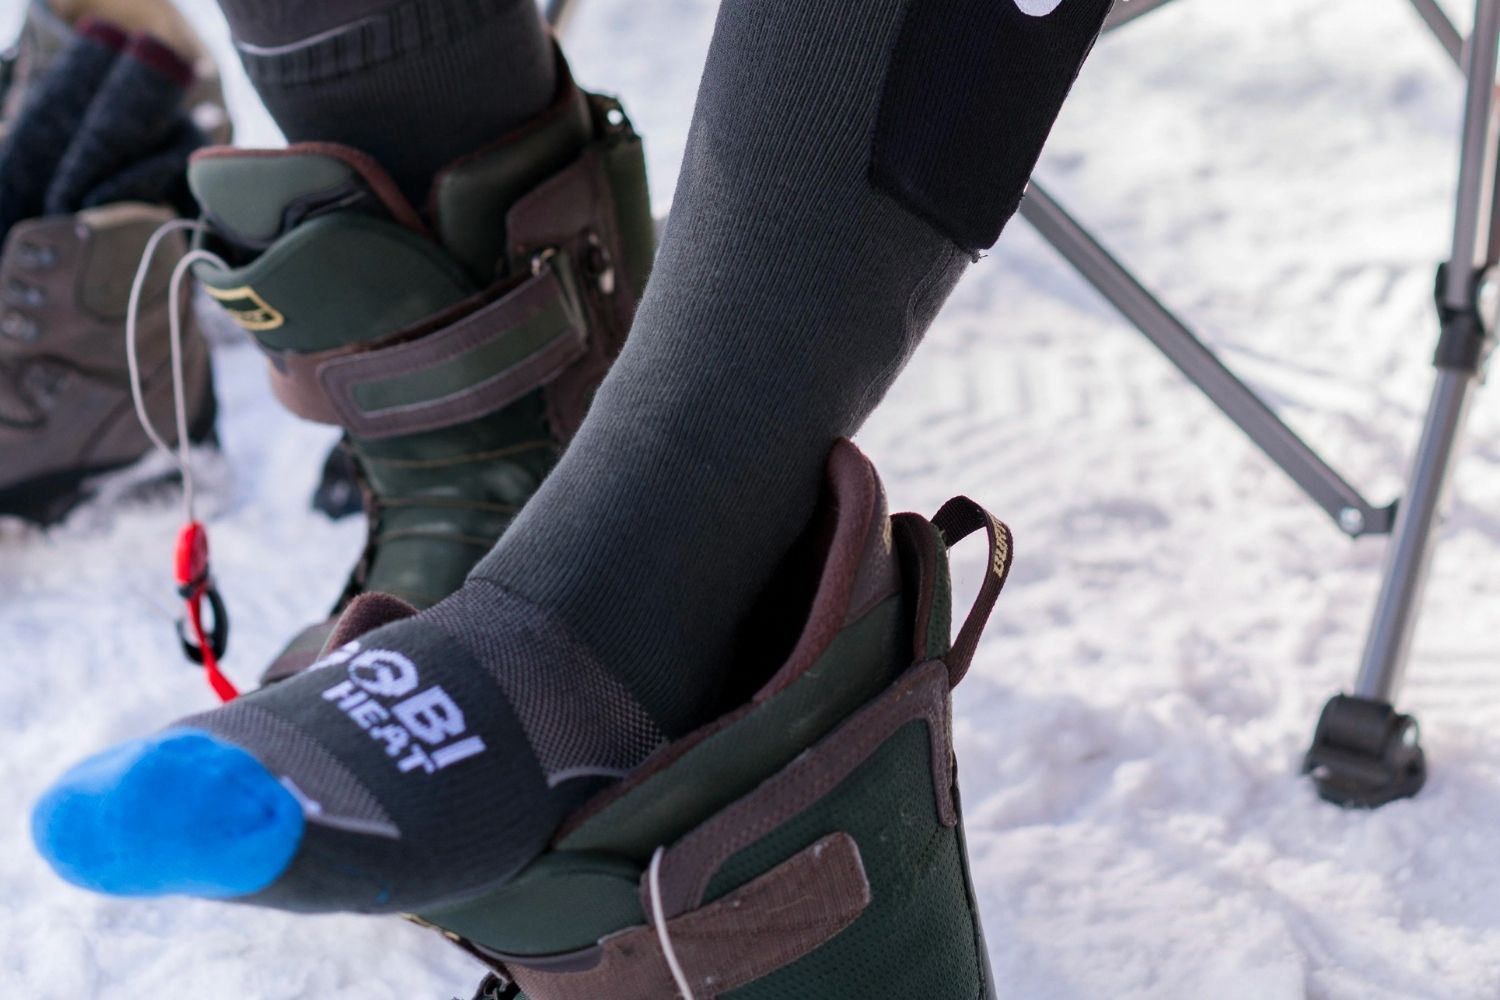 A person taking their foot out of a ski boot in a snowy setting while wearing Gobi heat tread heated socks.